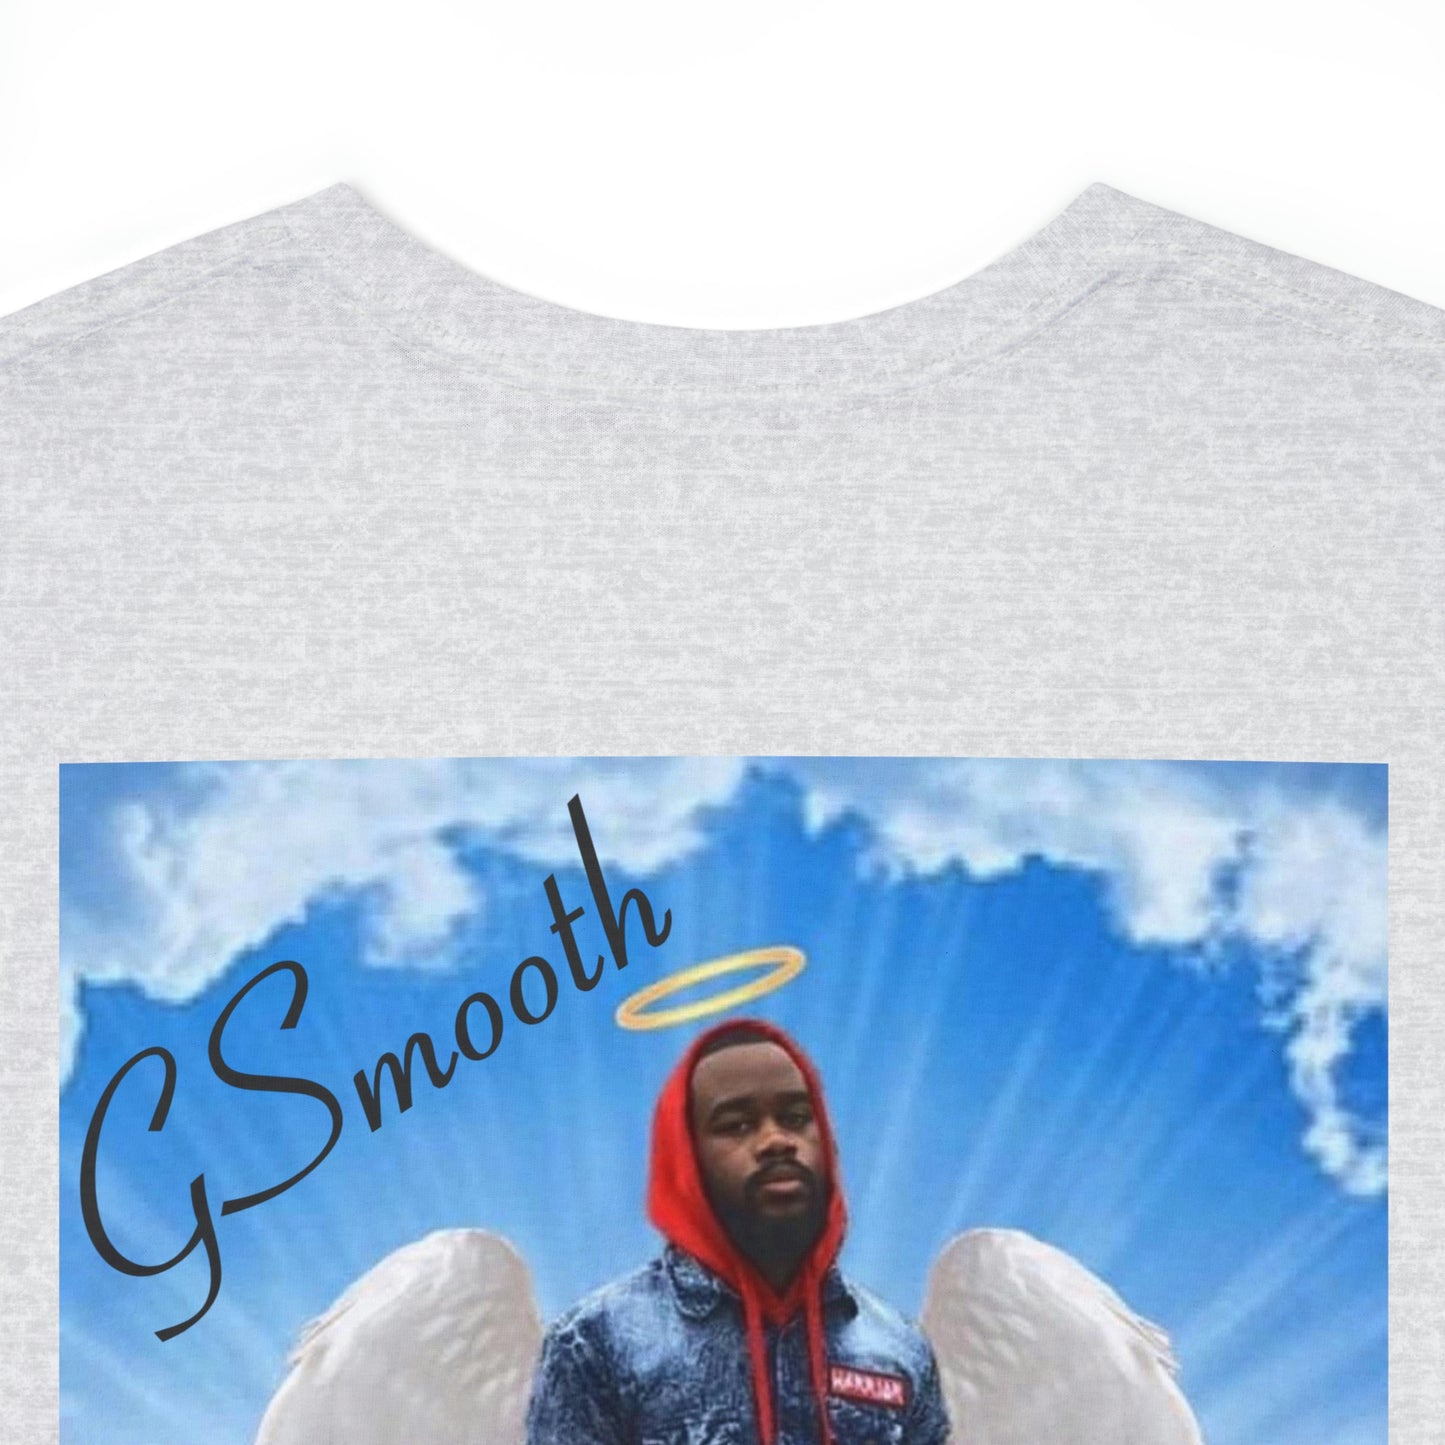 "GSmooth R.I.P Always Remembered"  Heavy Cotton Tee